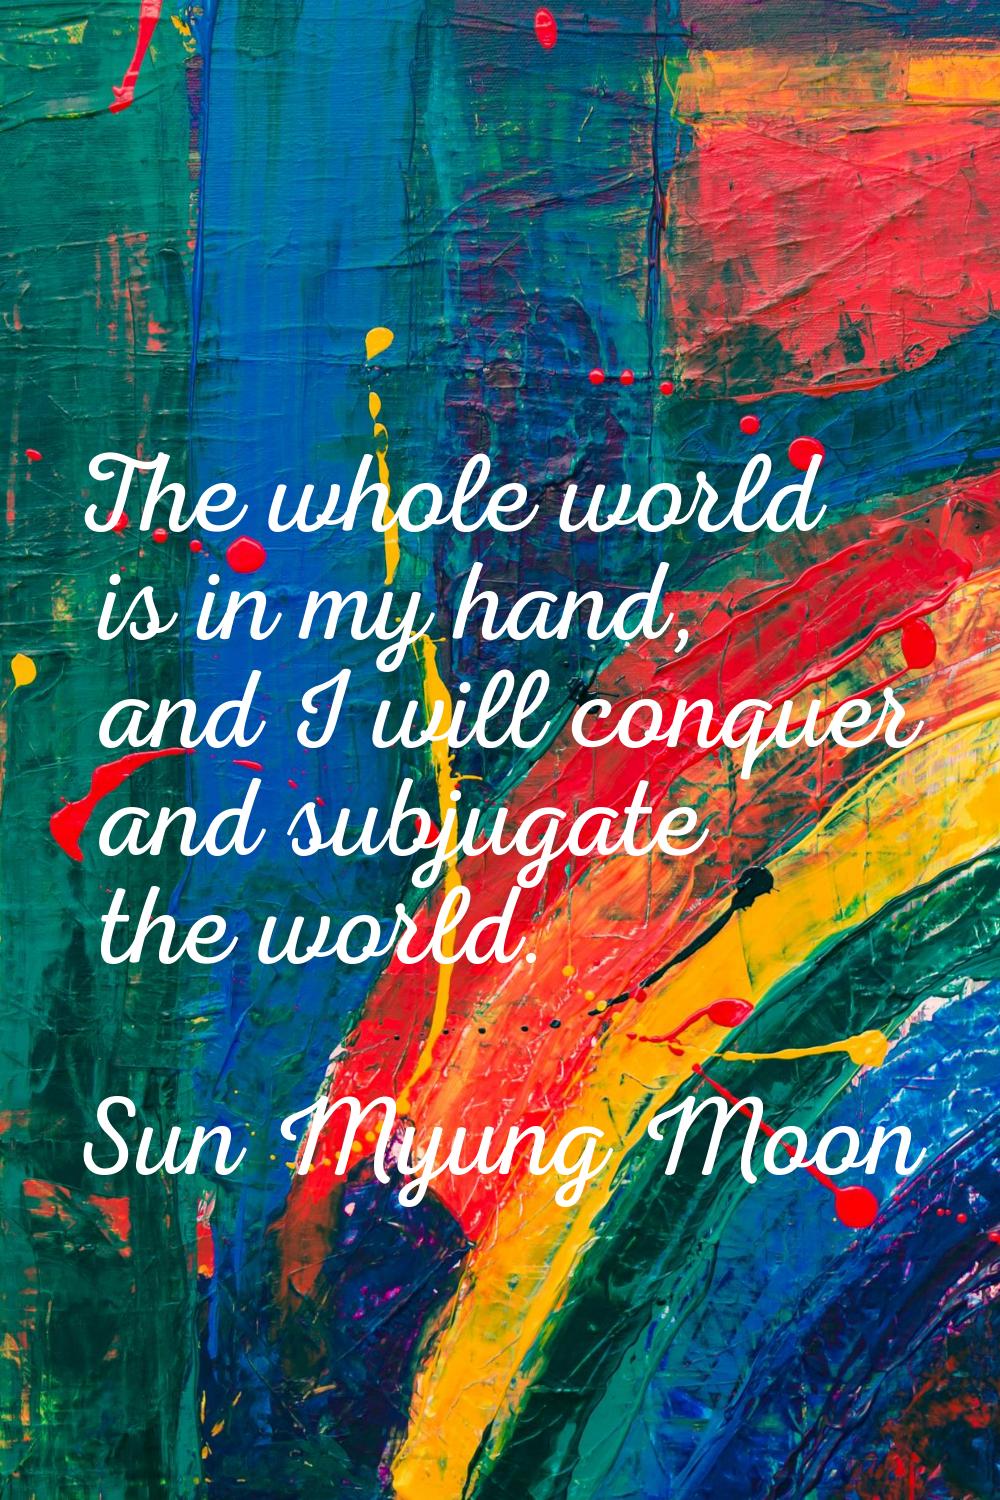 The whole world is in my hand, and I will conquer and subjugate the world.